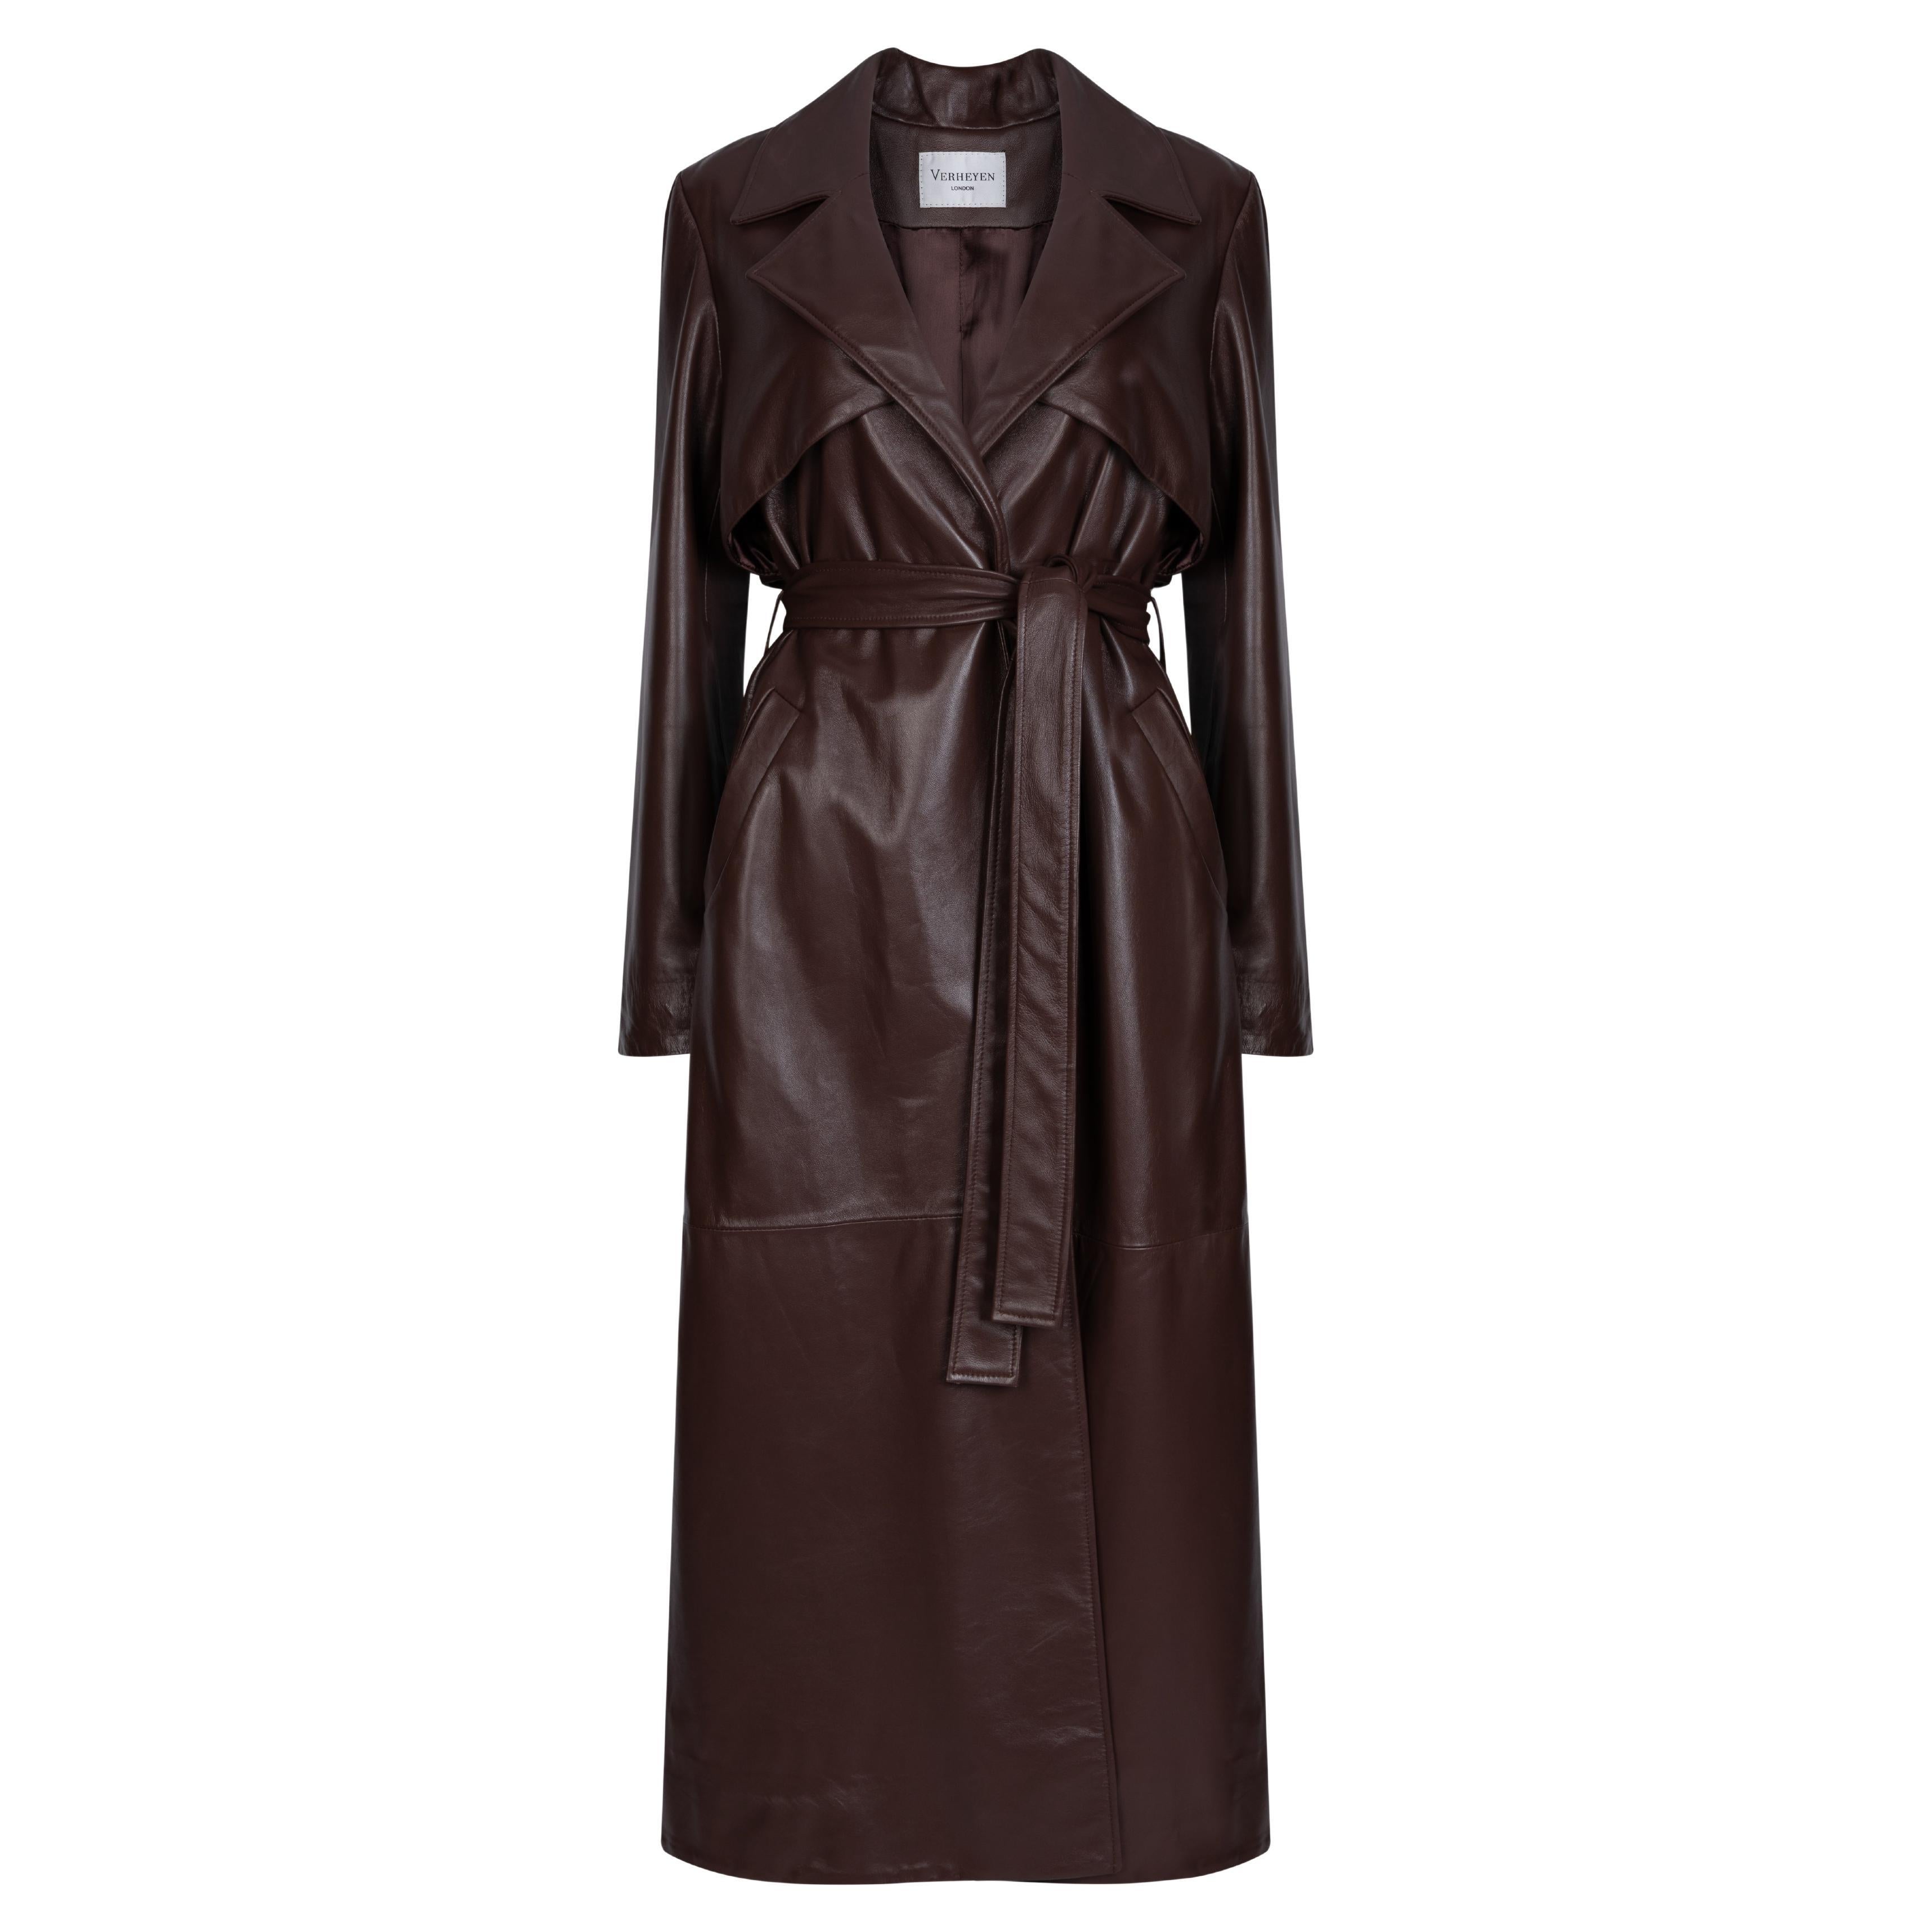 Verheyen London Leather Trench Coat in Chocolate Brown - Size uk 12  For Sale